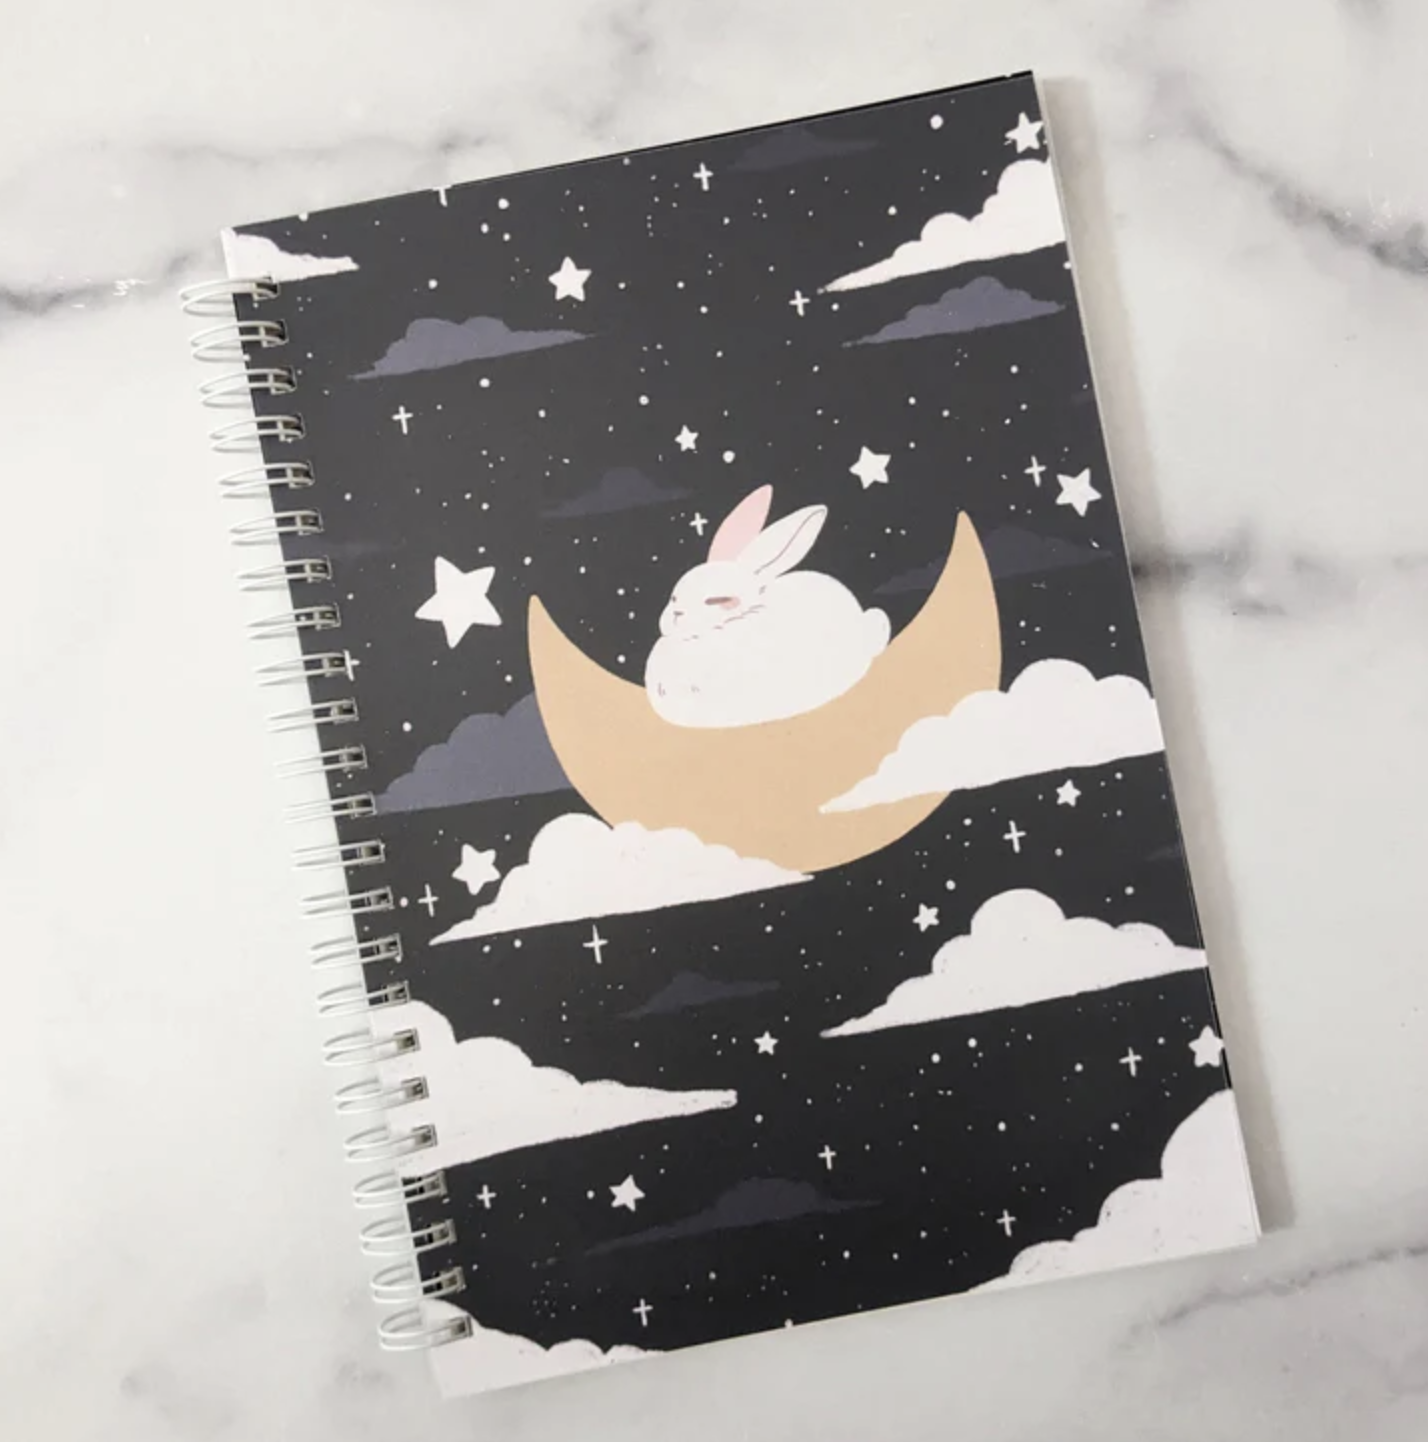 Spiral sticker book featuring bunny sleeping on a crescent moon.